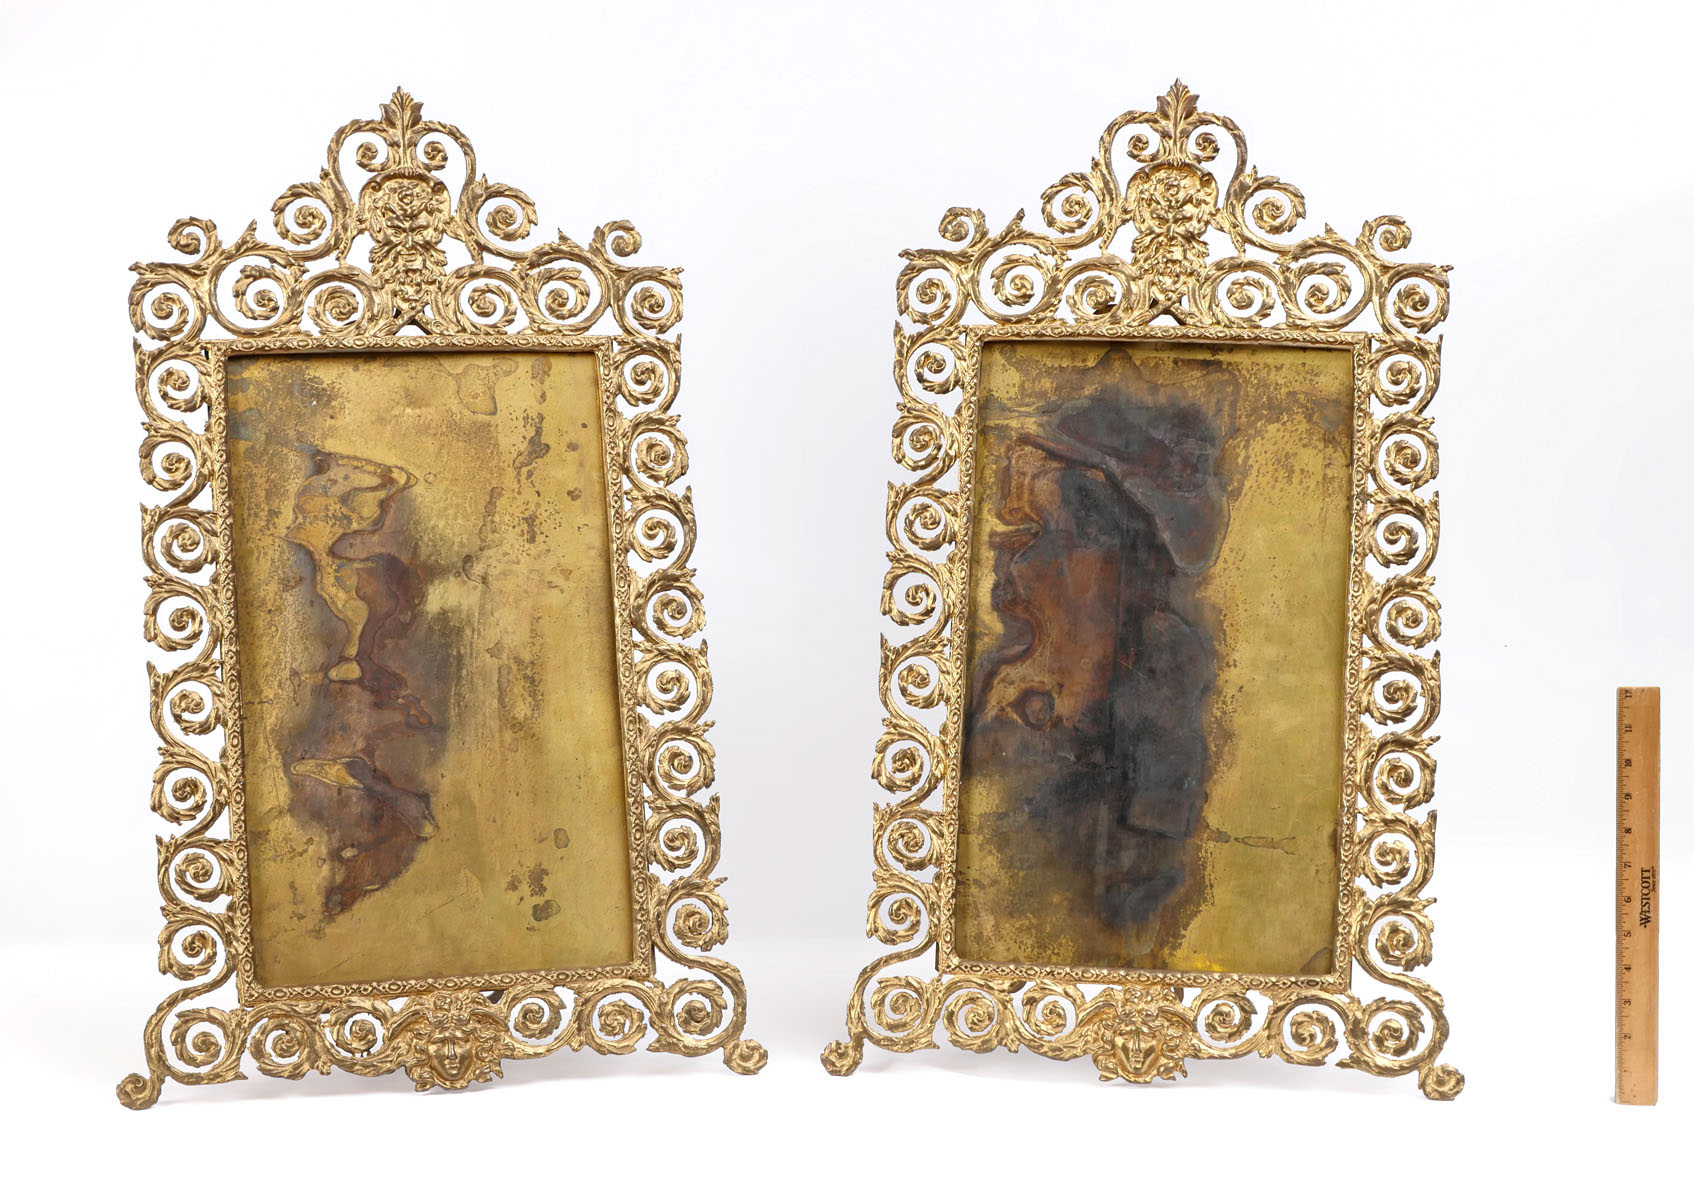 PAIR OF BRASS ORNATE FRAMES WITH